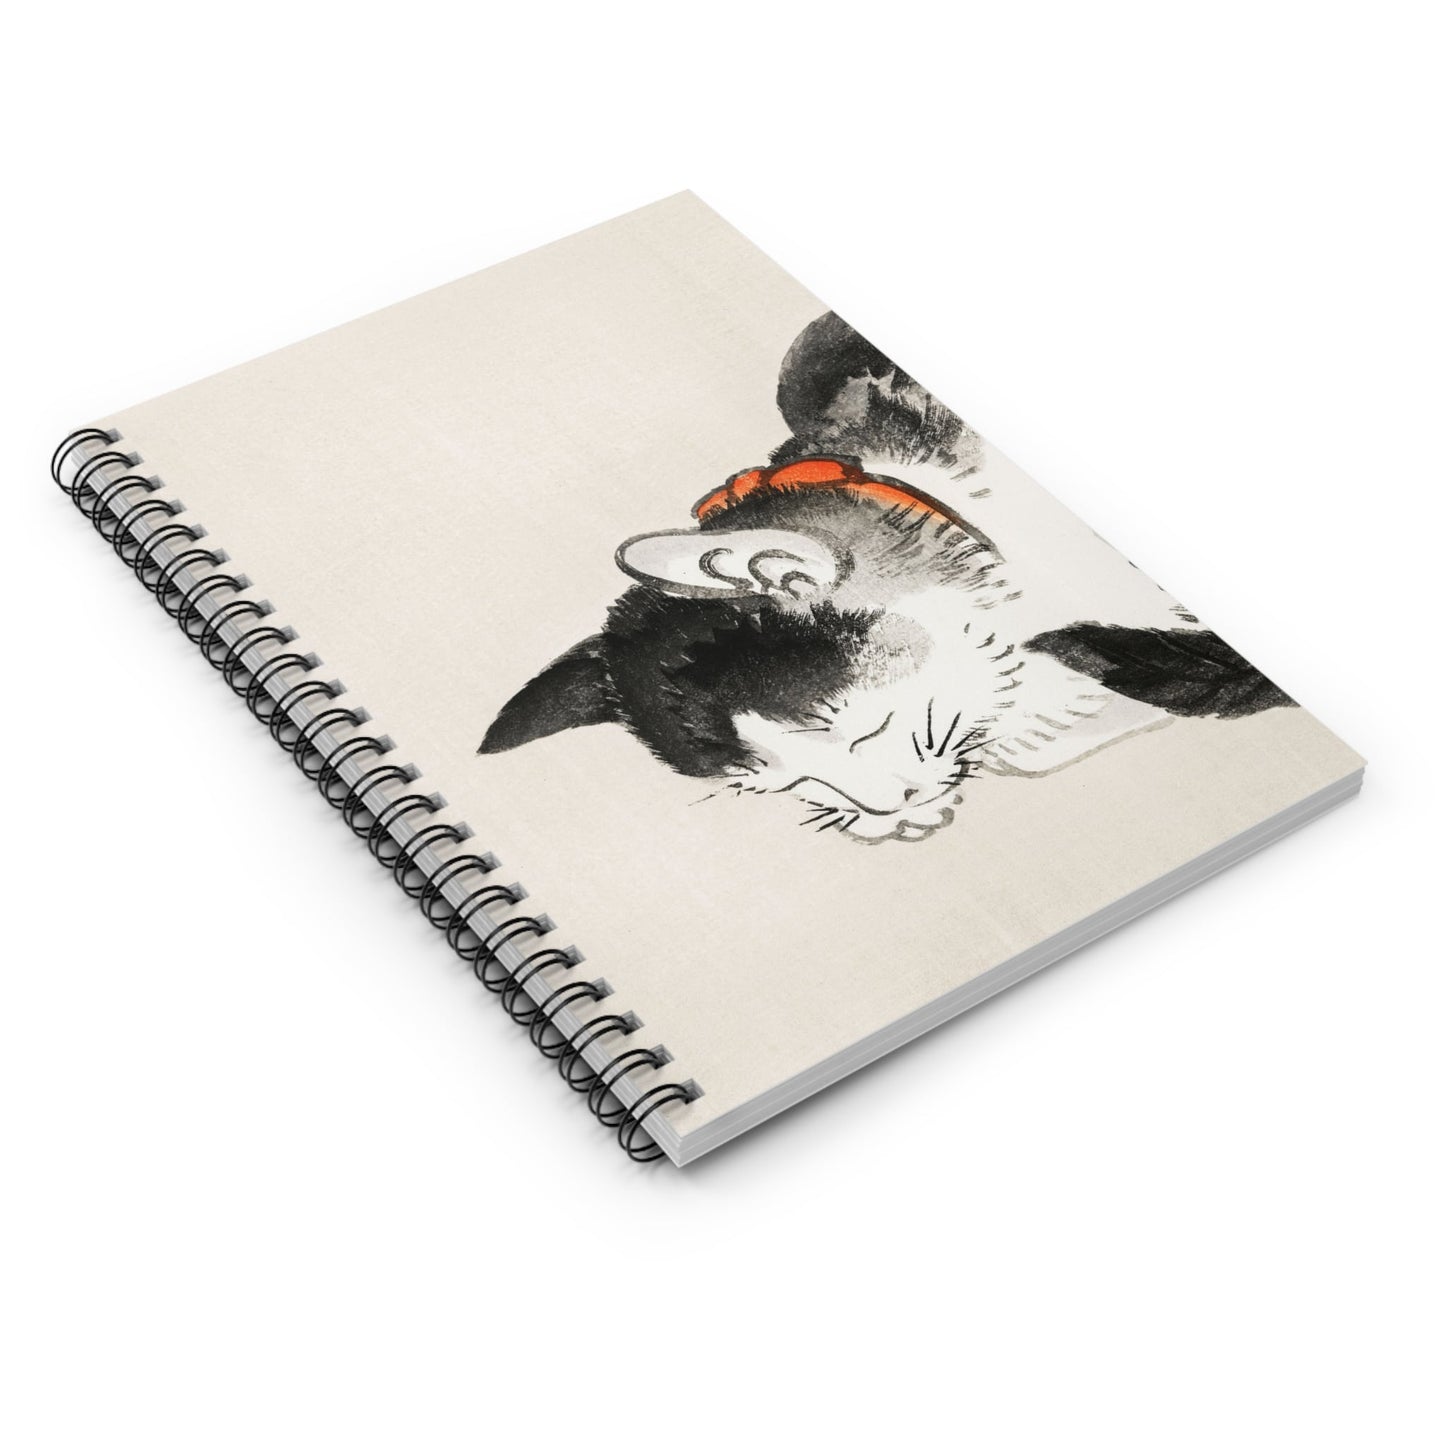 Japanese Black and White Cat Spiral Notebook Laying Flat on White Surface